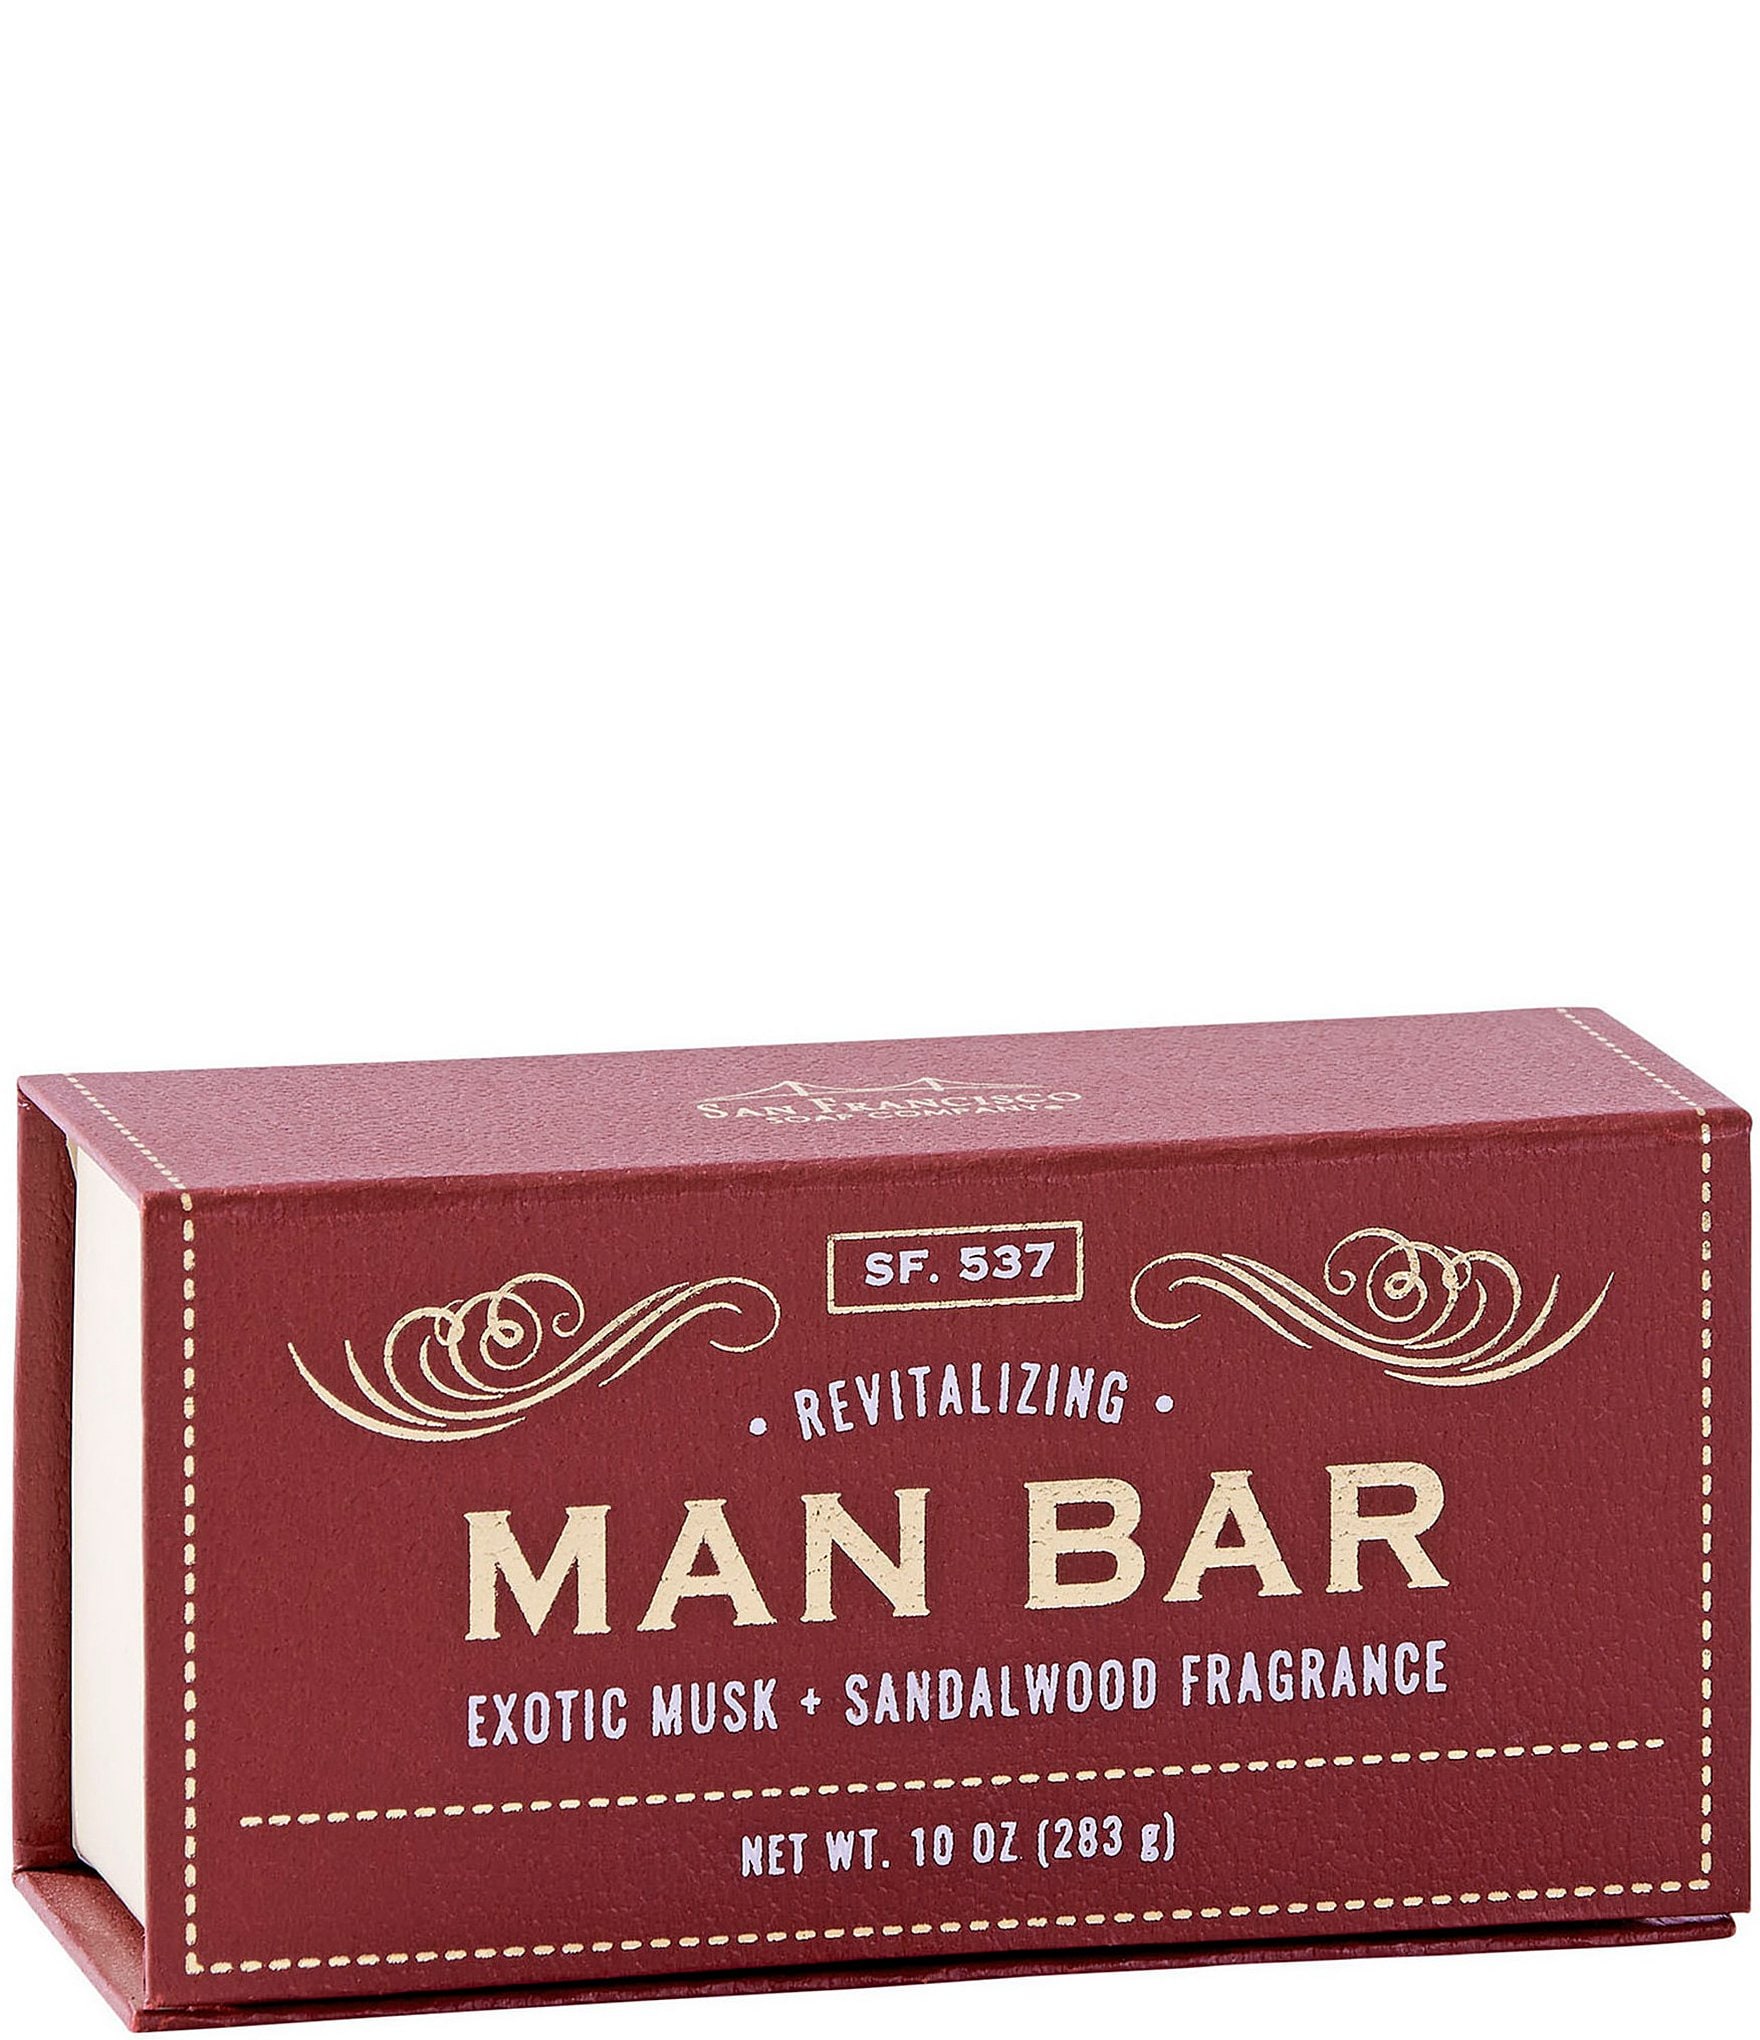 San Francisco Soap Company Man Bar 3-Piece Gift Set Featuring All New Scents: Coastal Driftwood, Peppered Patchouli, and Spiced Tobacco